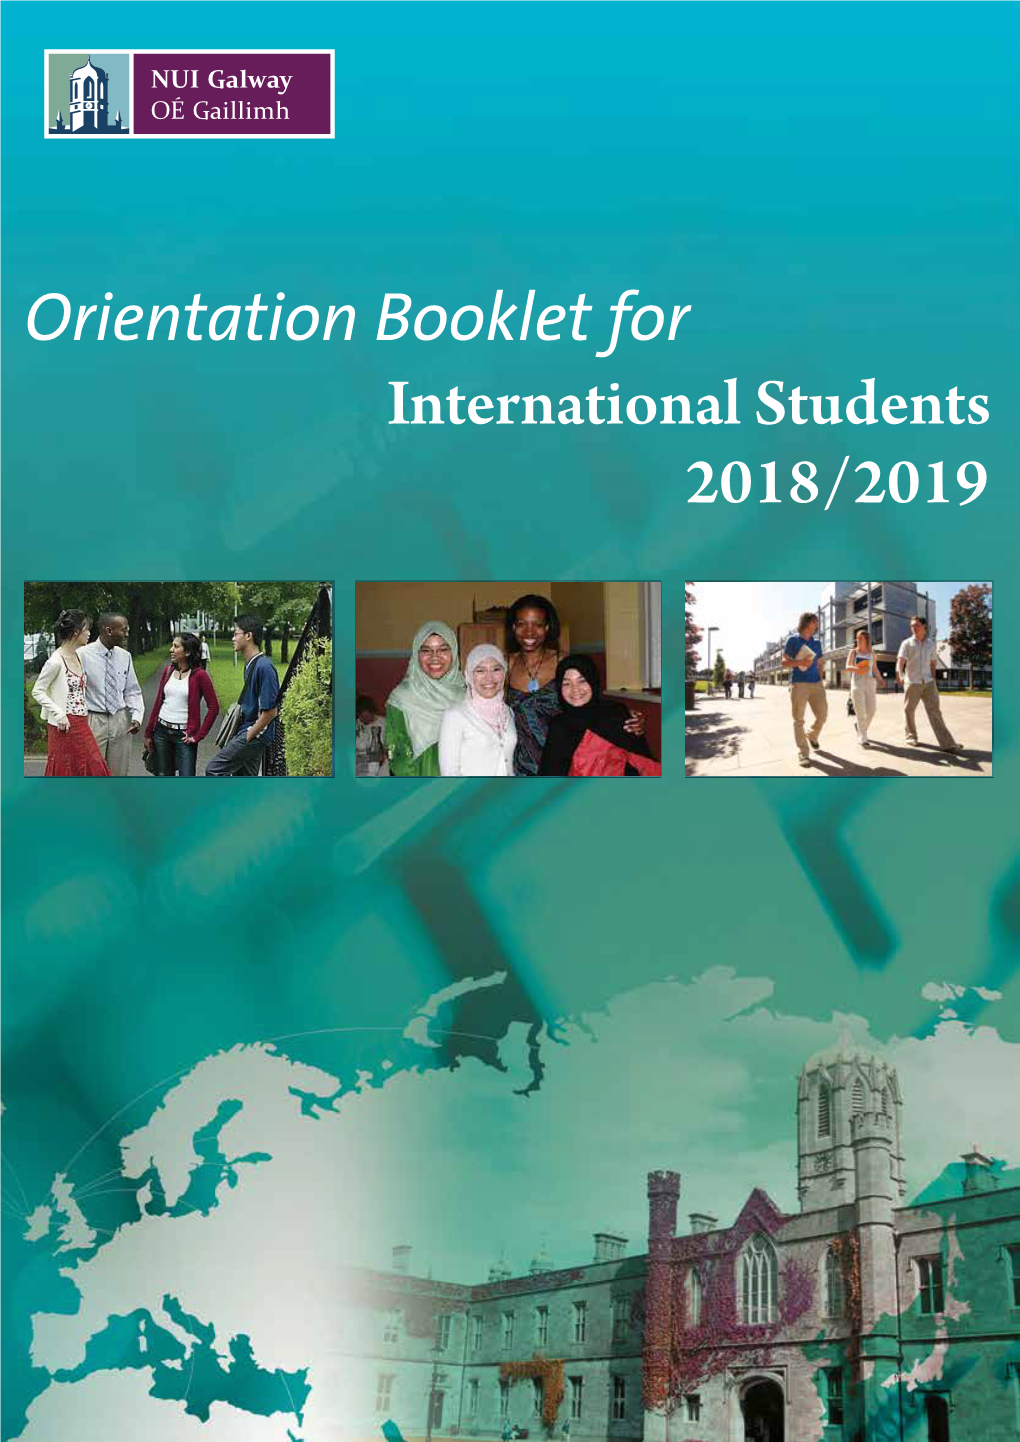 Orientation Booklet for International Students 2018/2019